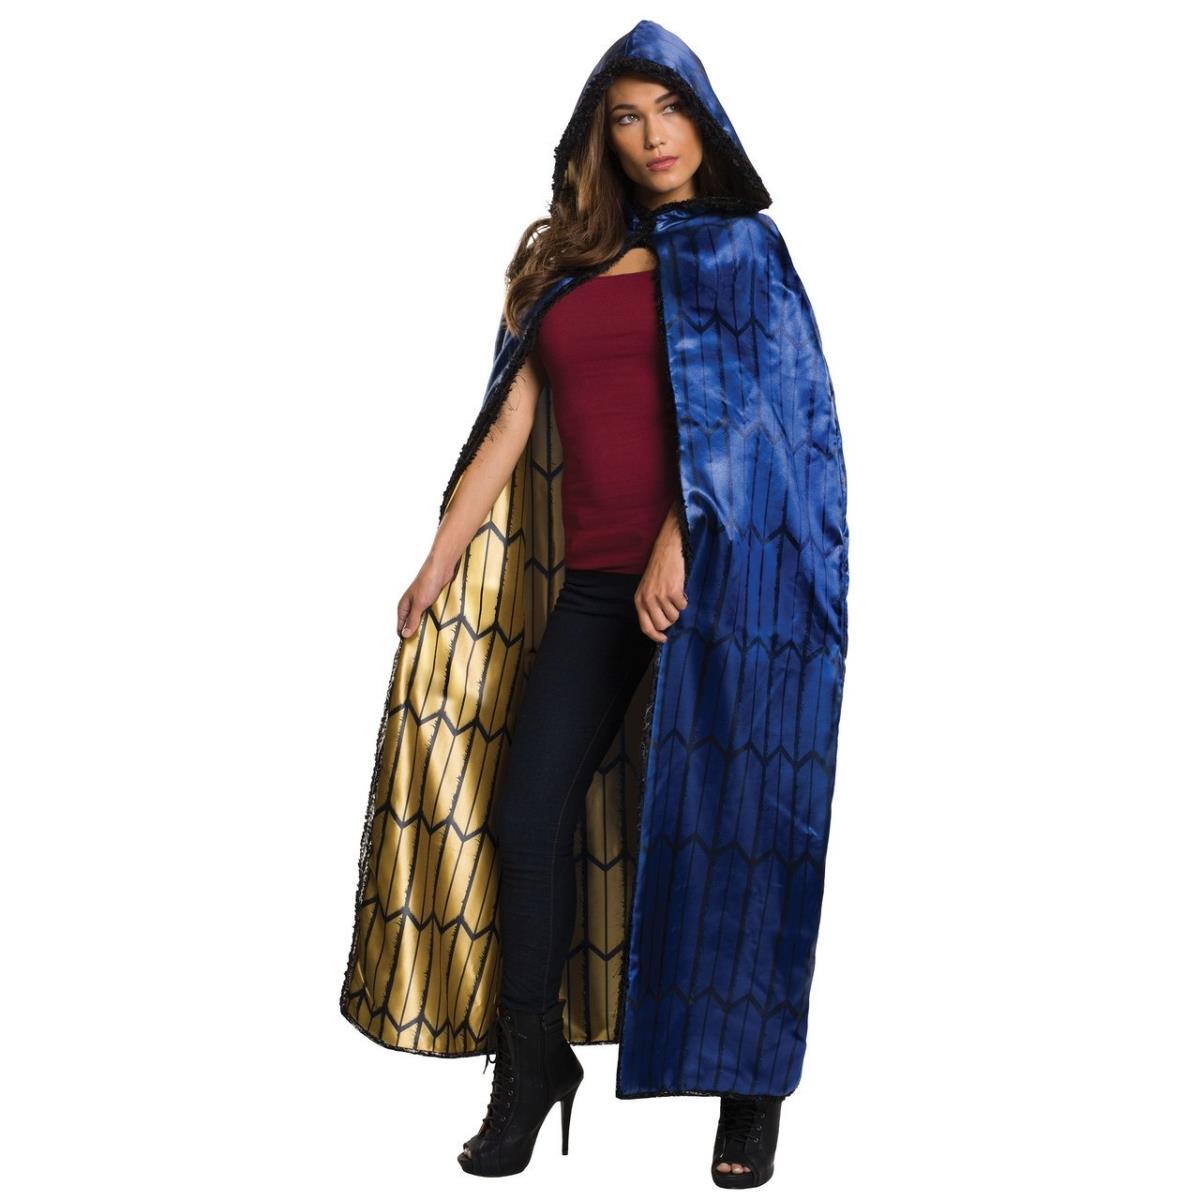 Rubies Costume 272181 Wonder Woman Deluxe Adult Cape, One Size